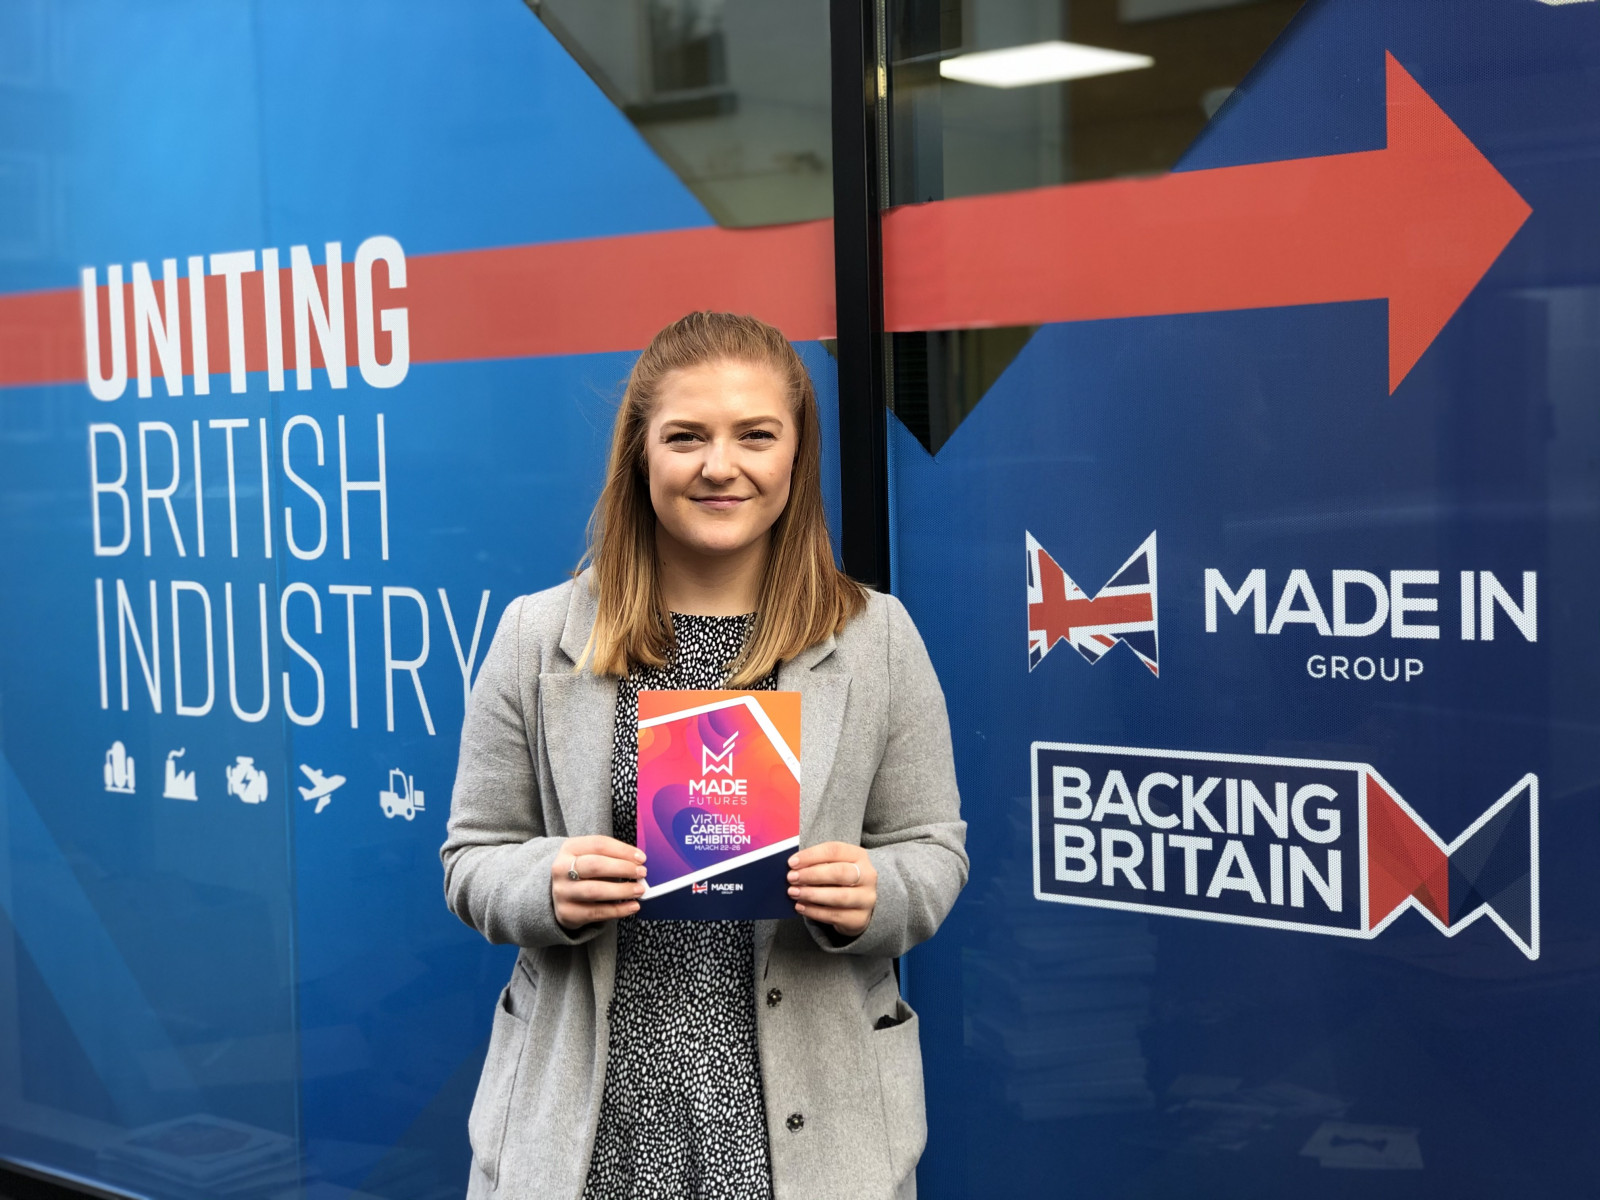 Made in group's Laura Becomes STEM Representative